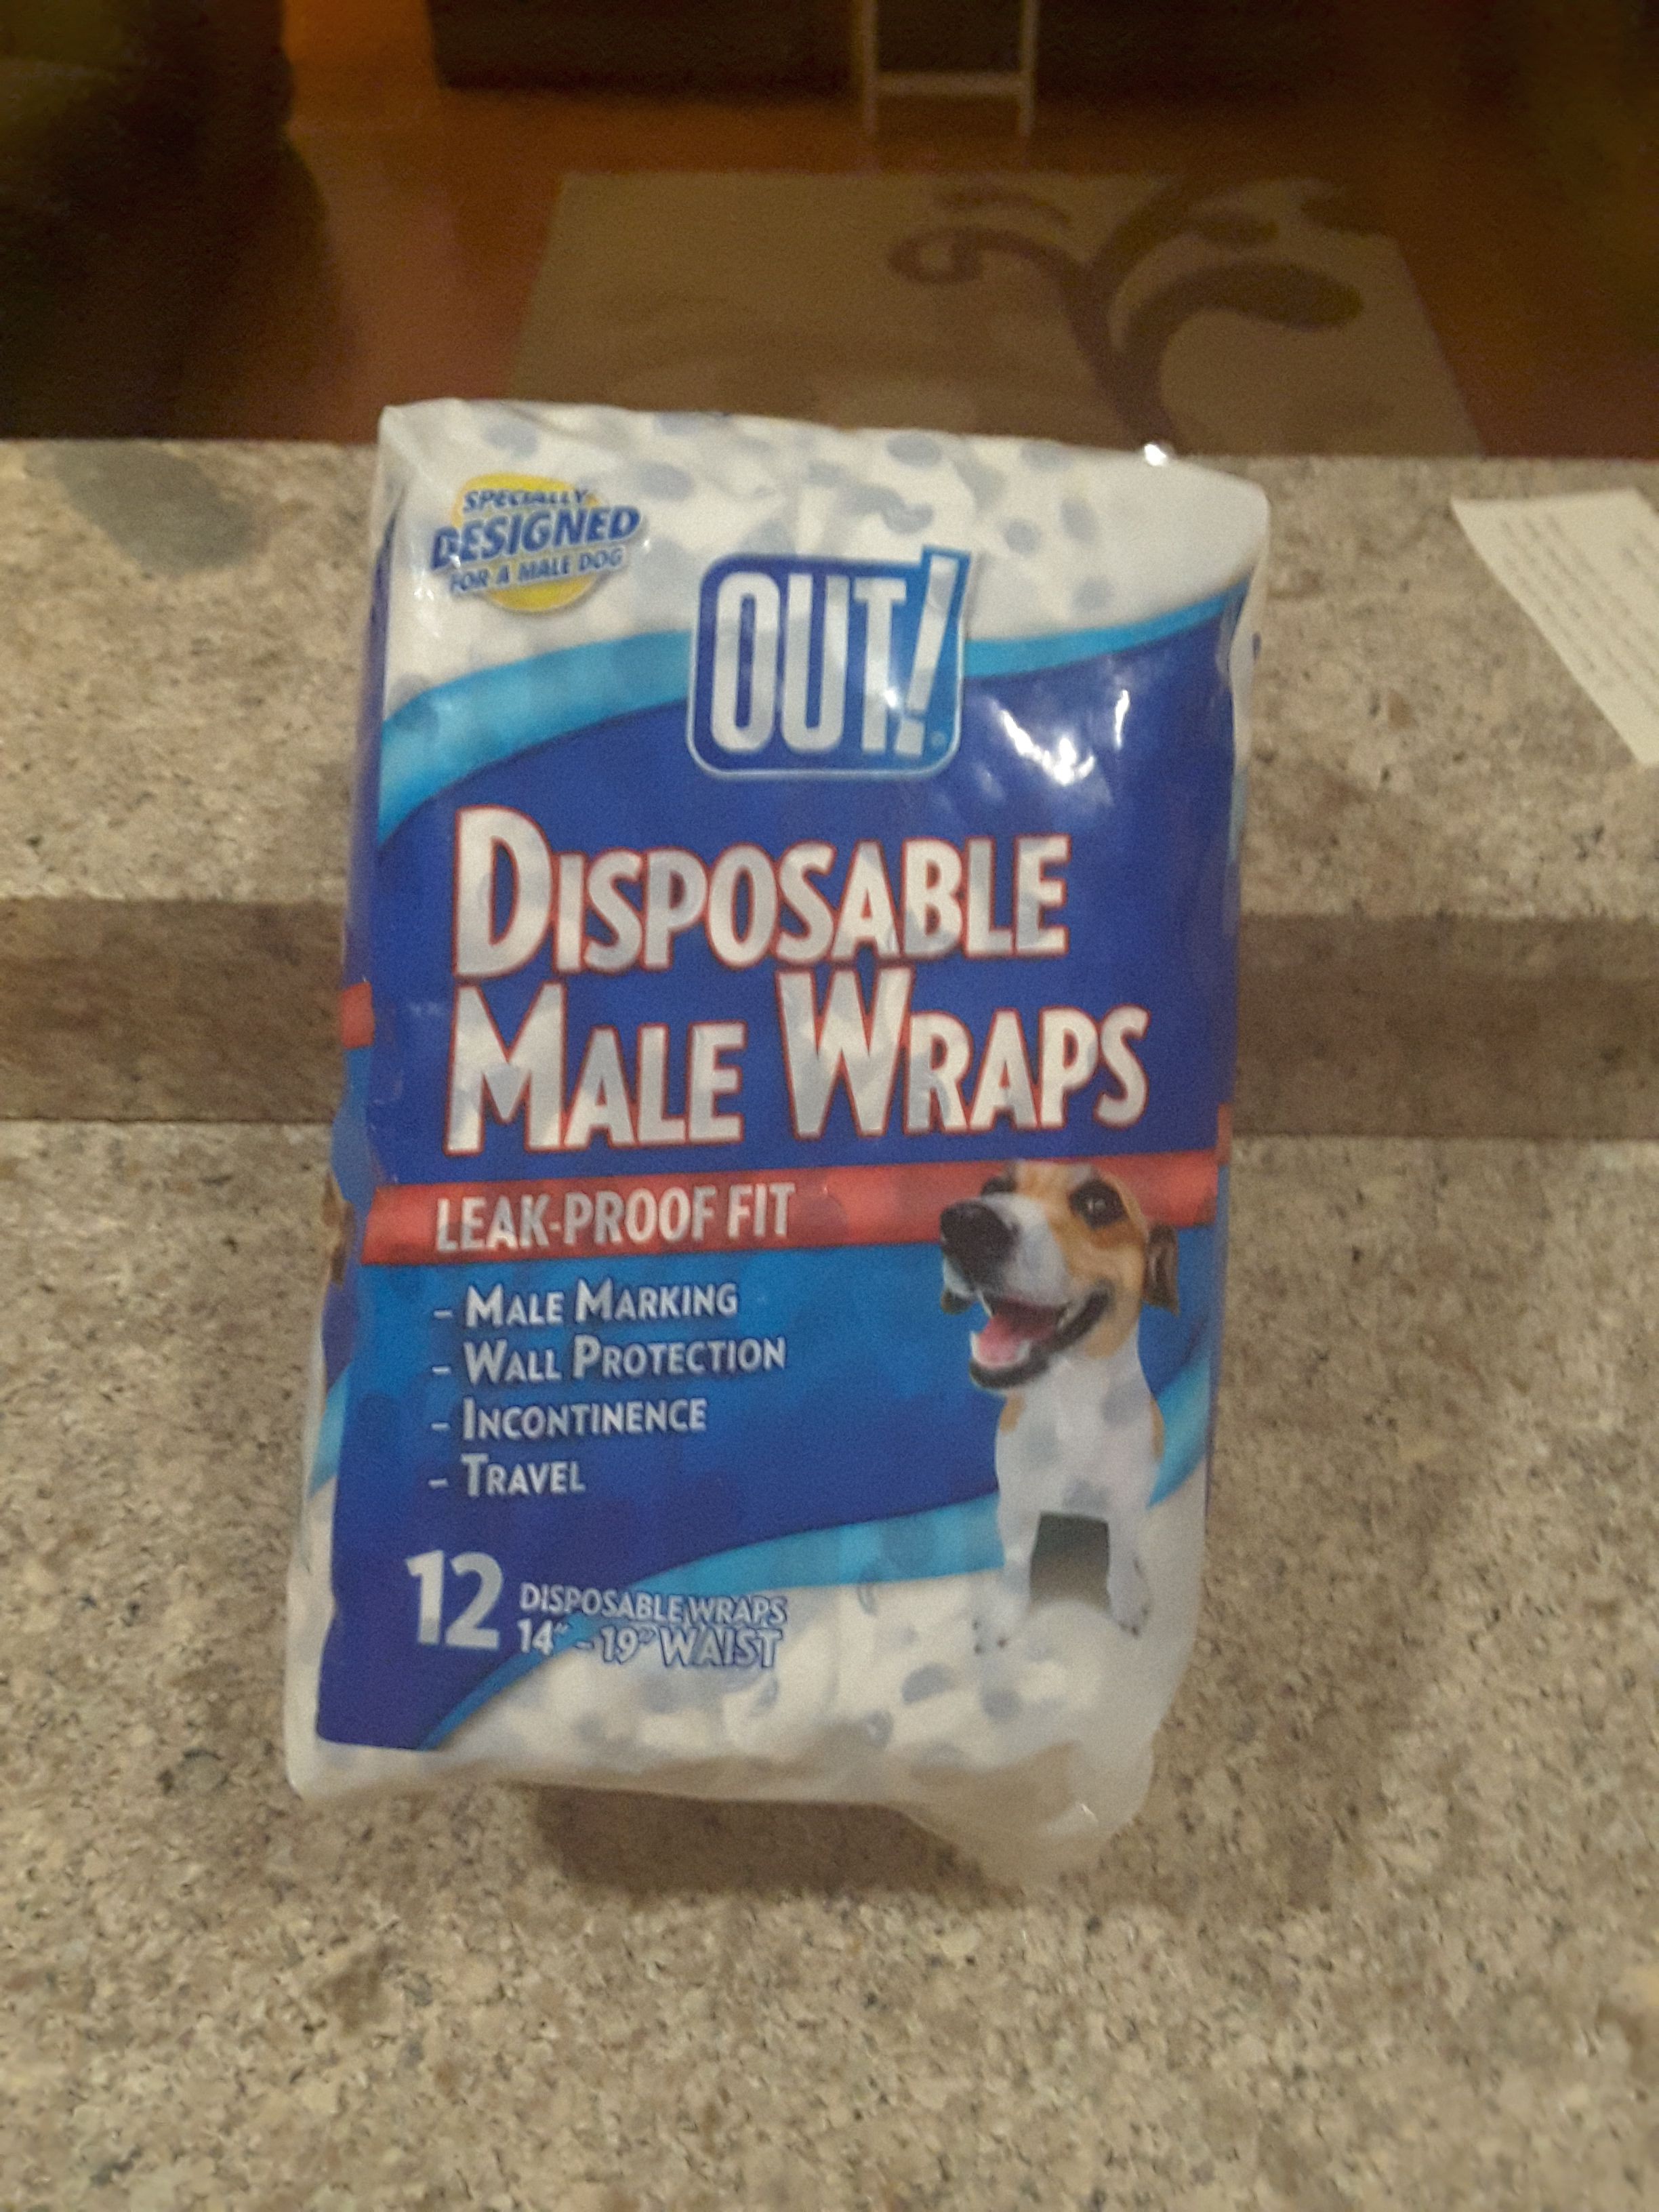 Doggie diapers